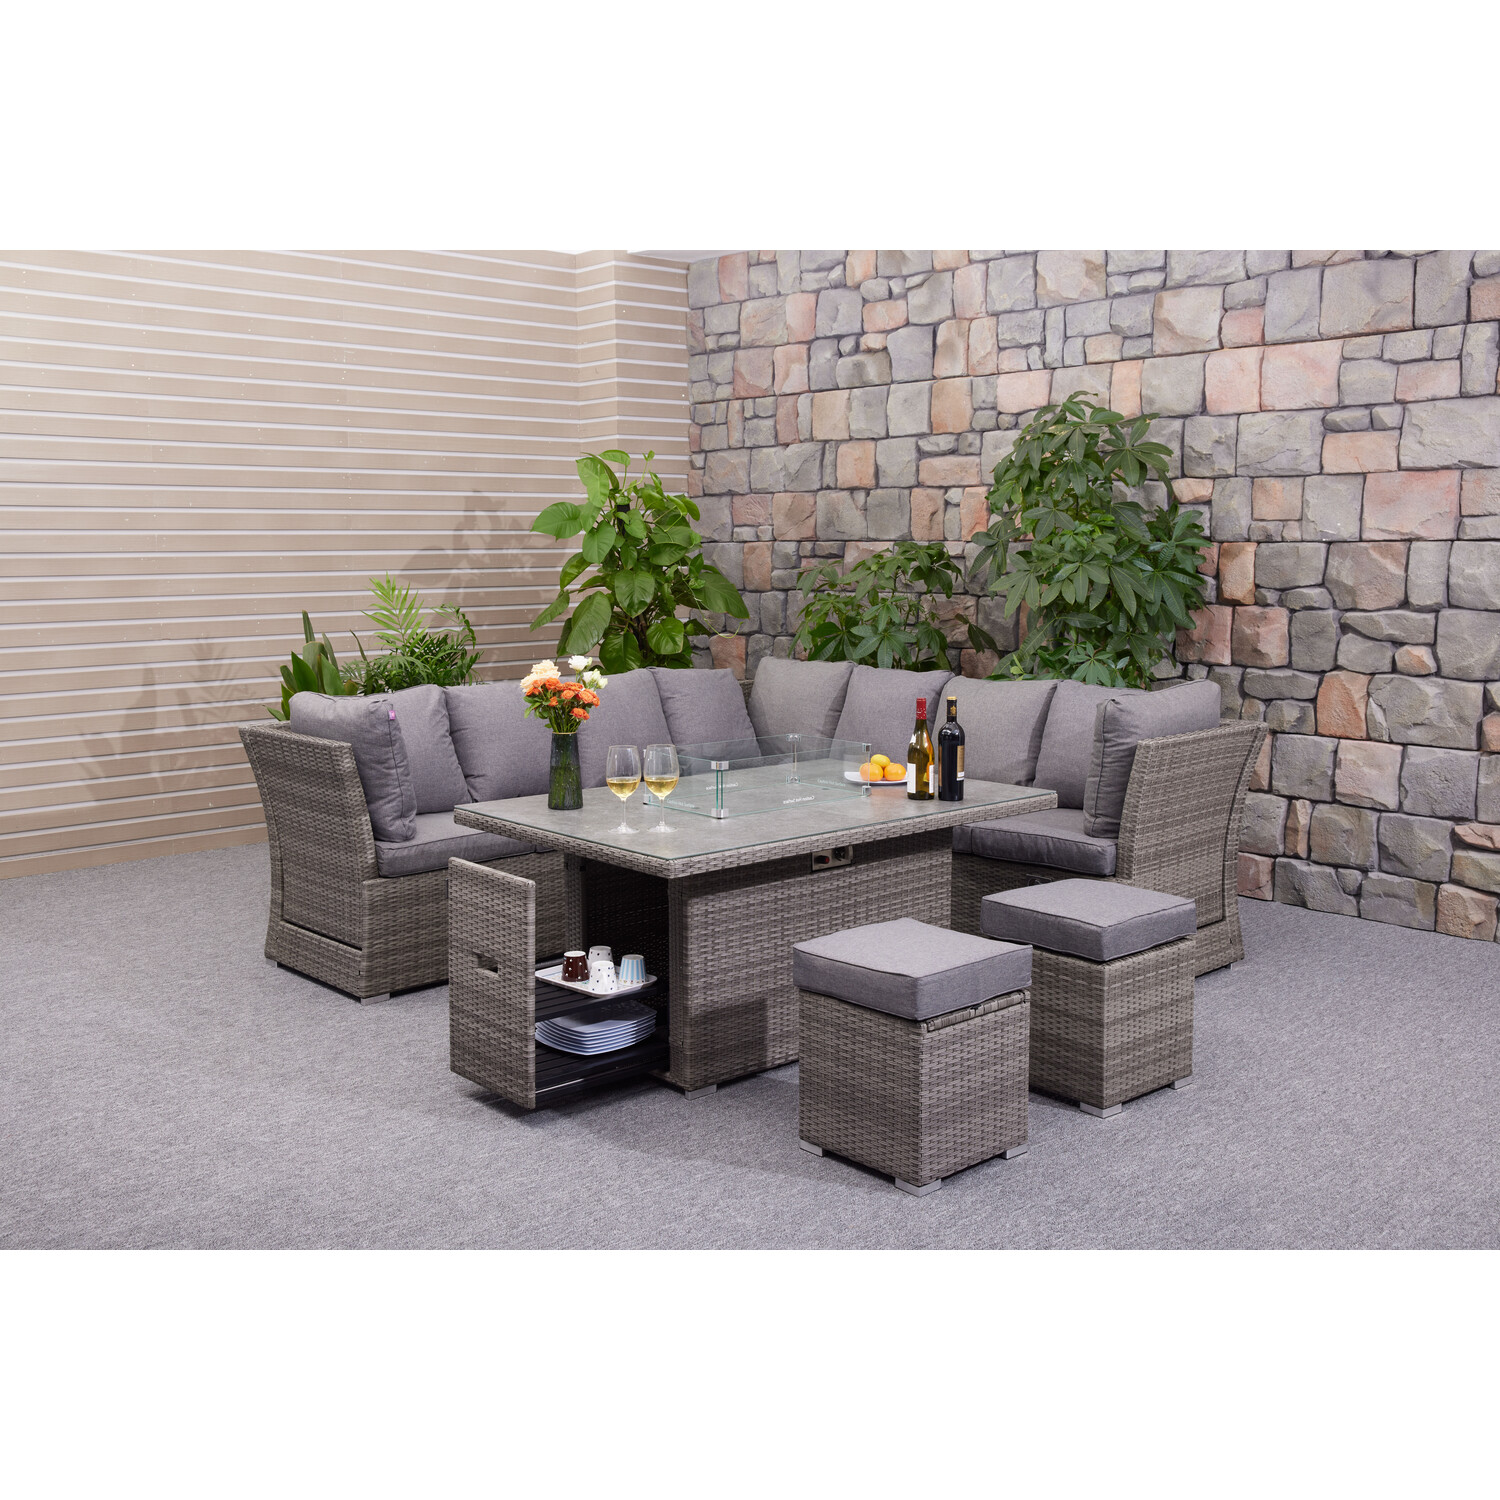 Malay Deluxe Malay New Hampshire 6 Seater Grey Wicker Fire Pit Garden Lounge Set Image 9